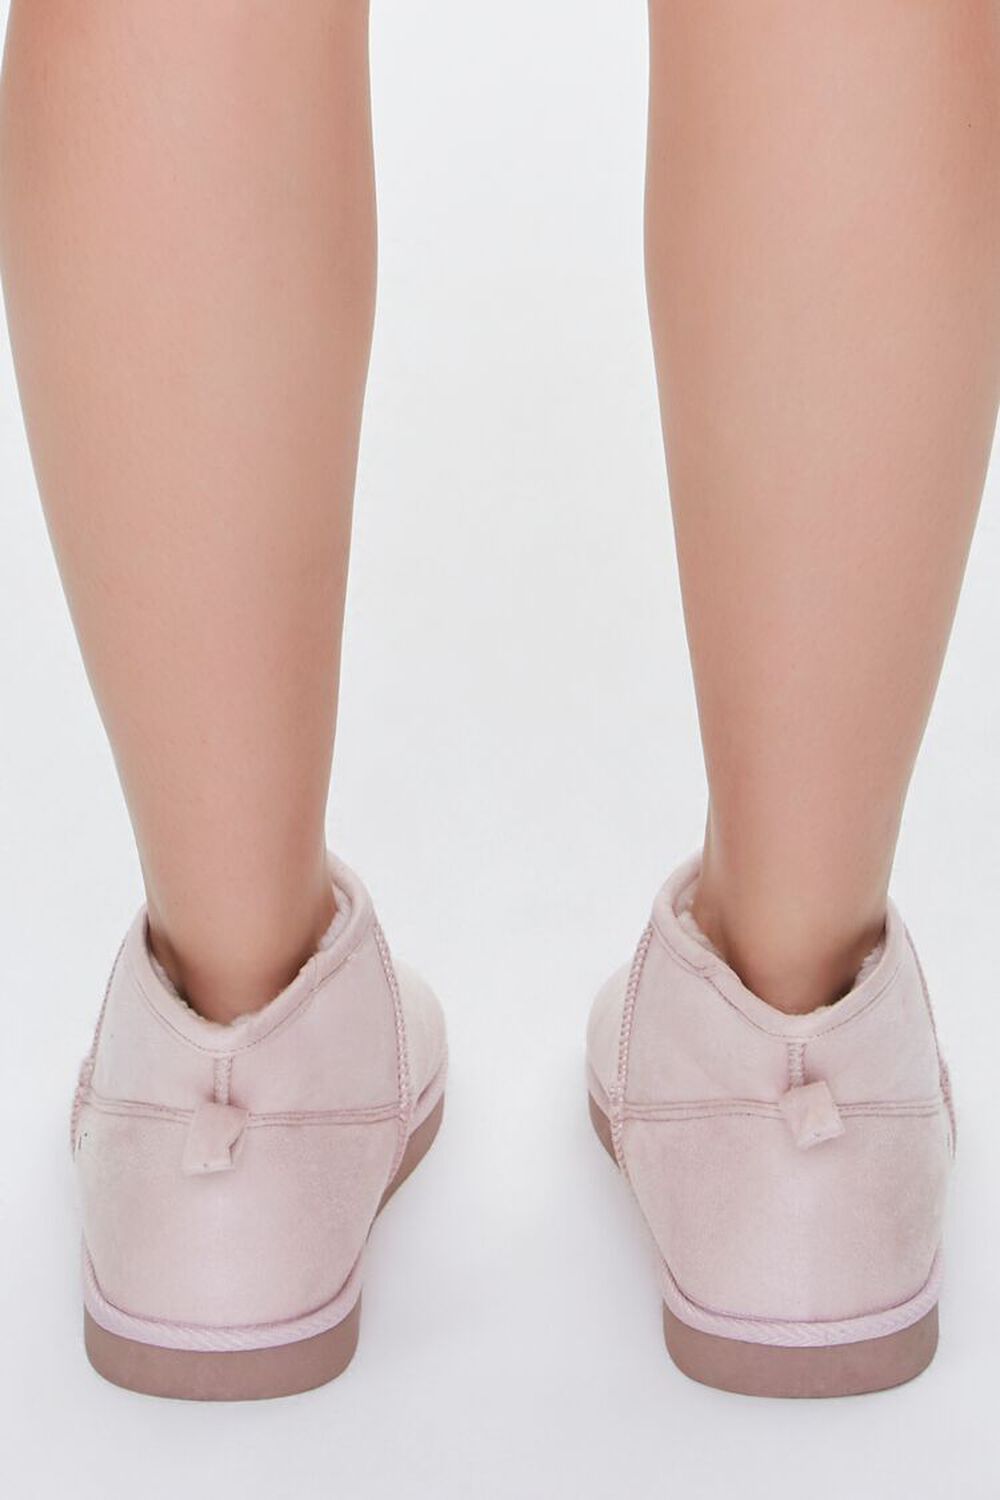 BLUSH Faux Suede Bootie Slippers, image 3